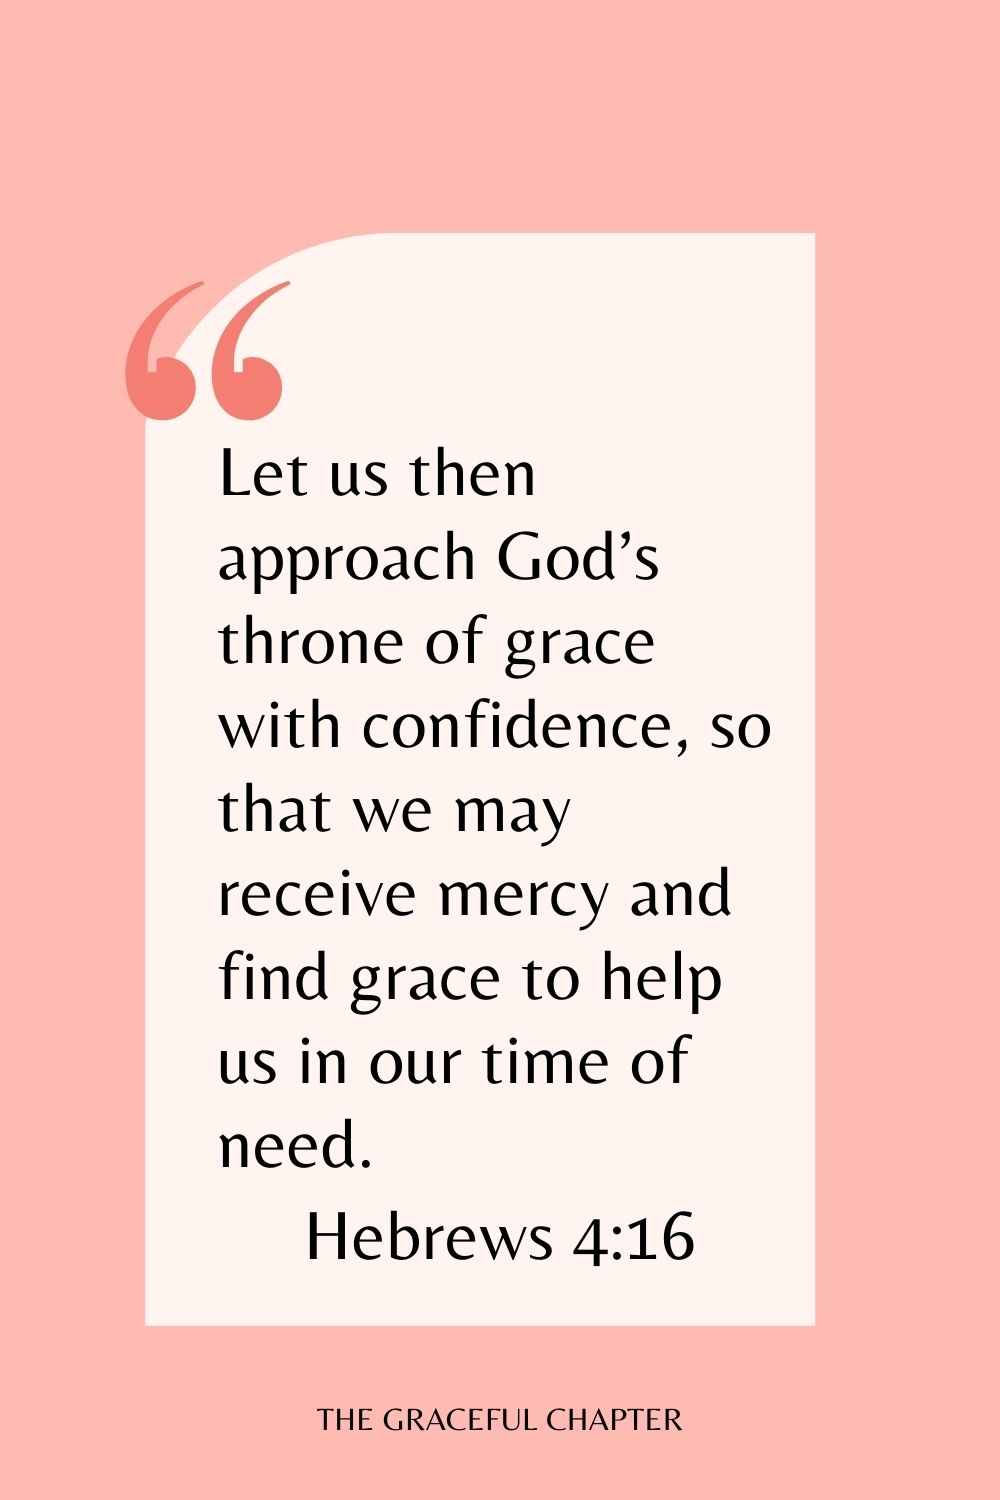 Let us then approach God’s throne of grace with confidence, so that we may receive mercy and find grace to help us in our time of need. Hebrews 4:16